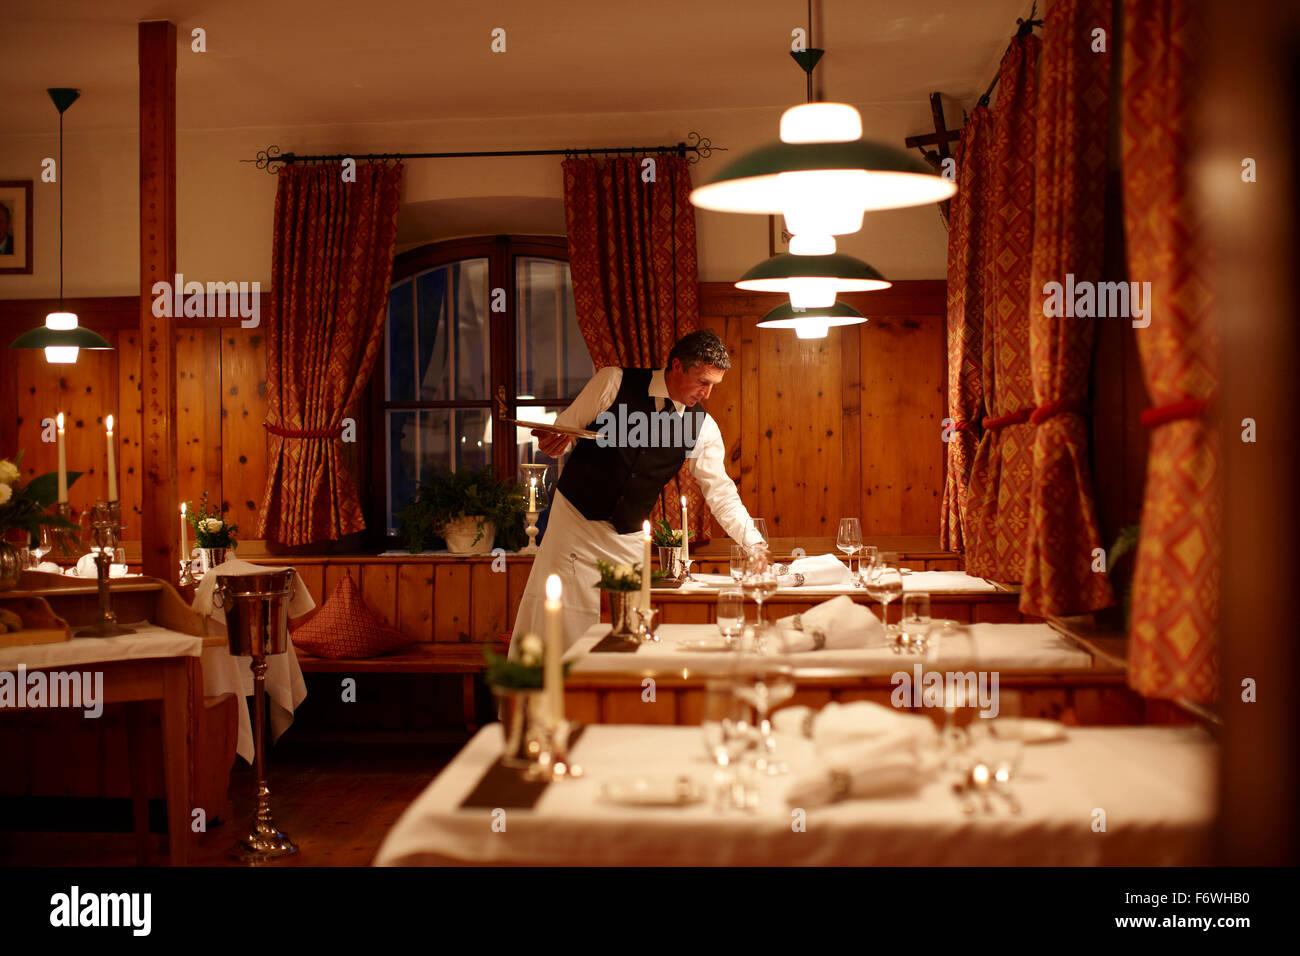 Waiter setting a table in a restaurant, Karthaus, Schnalstal, South Tyrol, Alto Adige, Italy Stock Photo